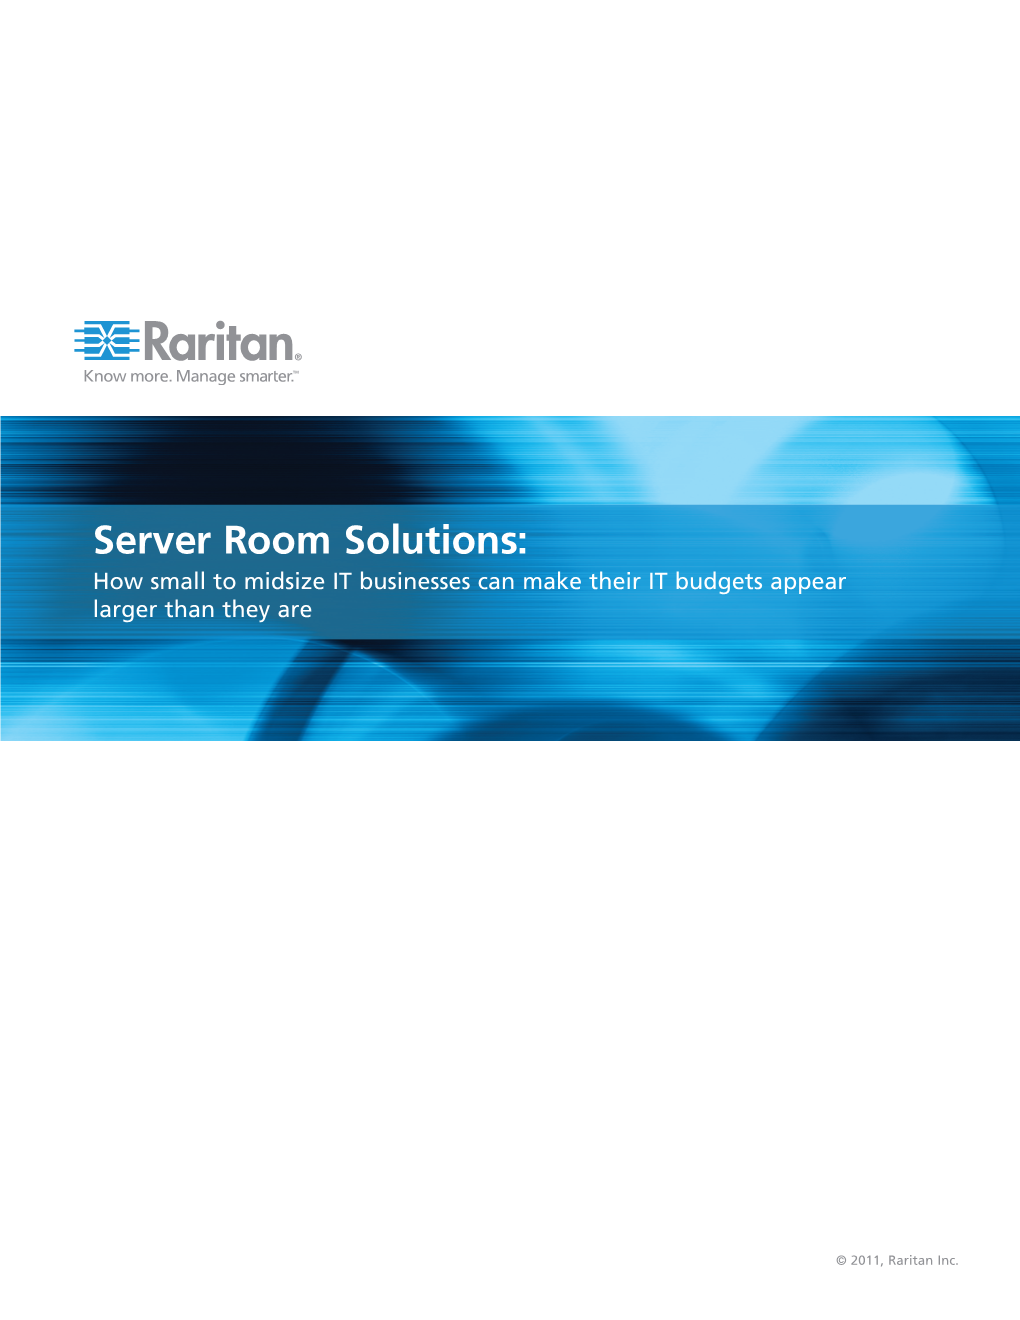 Server Room Solutions: How Small to Midsize IT Businesses Can Make Their Budgets Appear Larger Than They Are